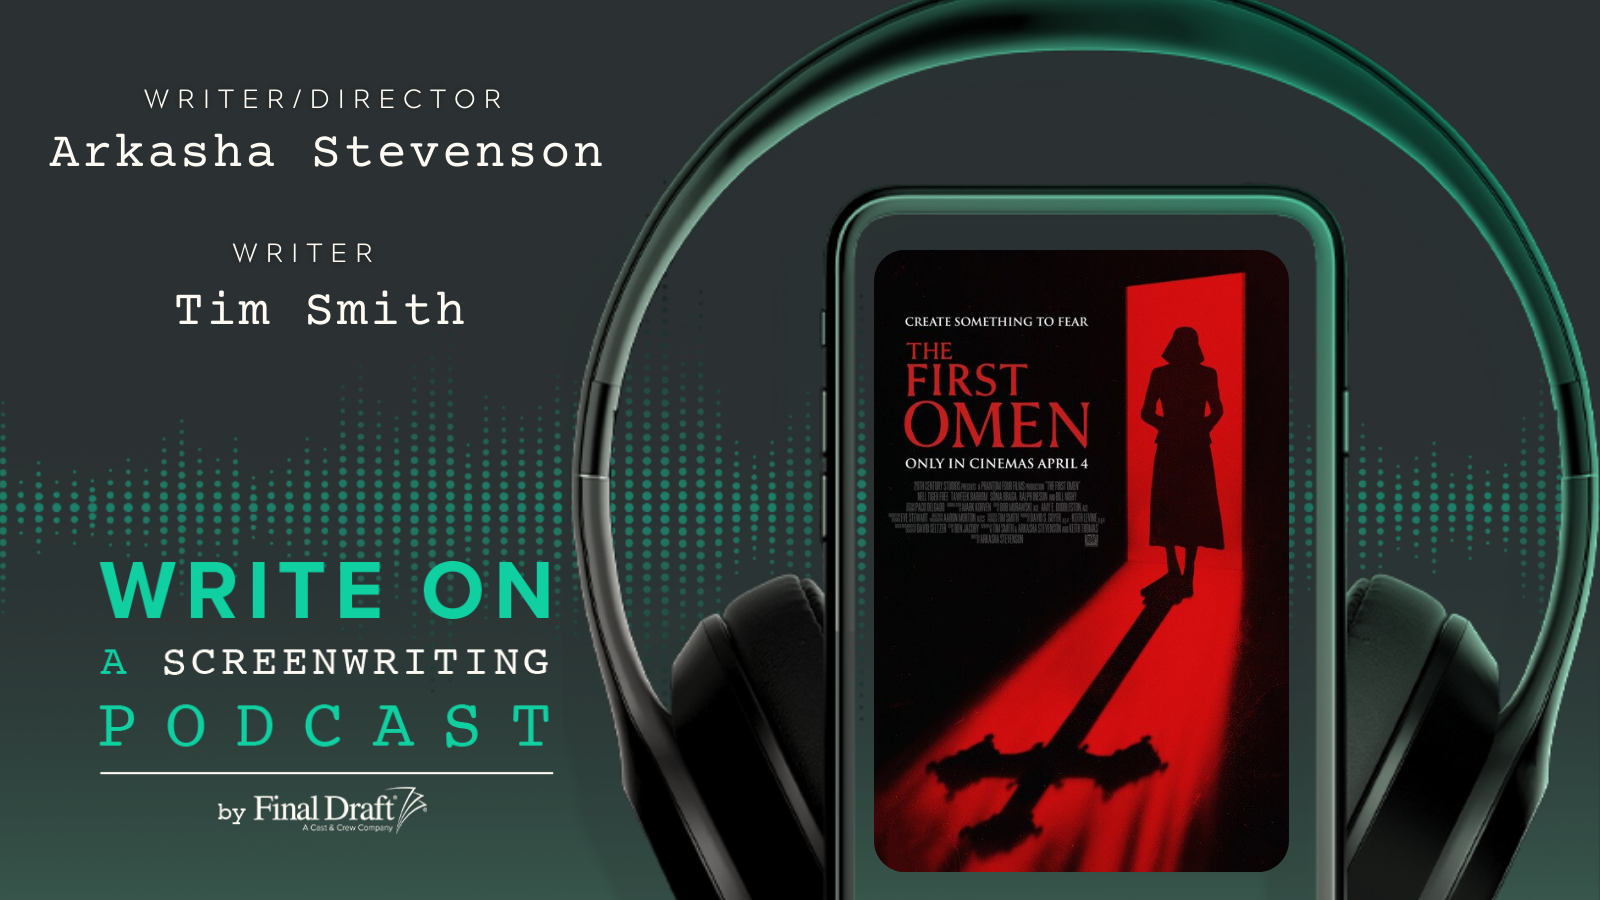 Write On: 'The First Omen' Writers Arkasha Stevenson and Tim Smith